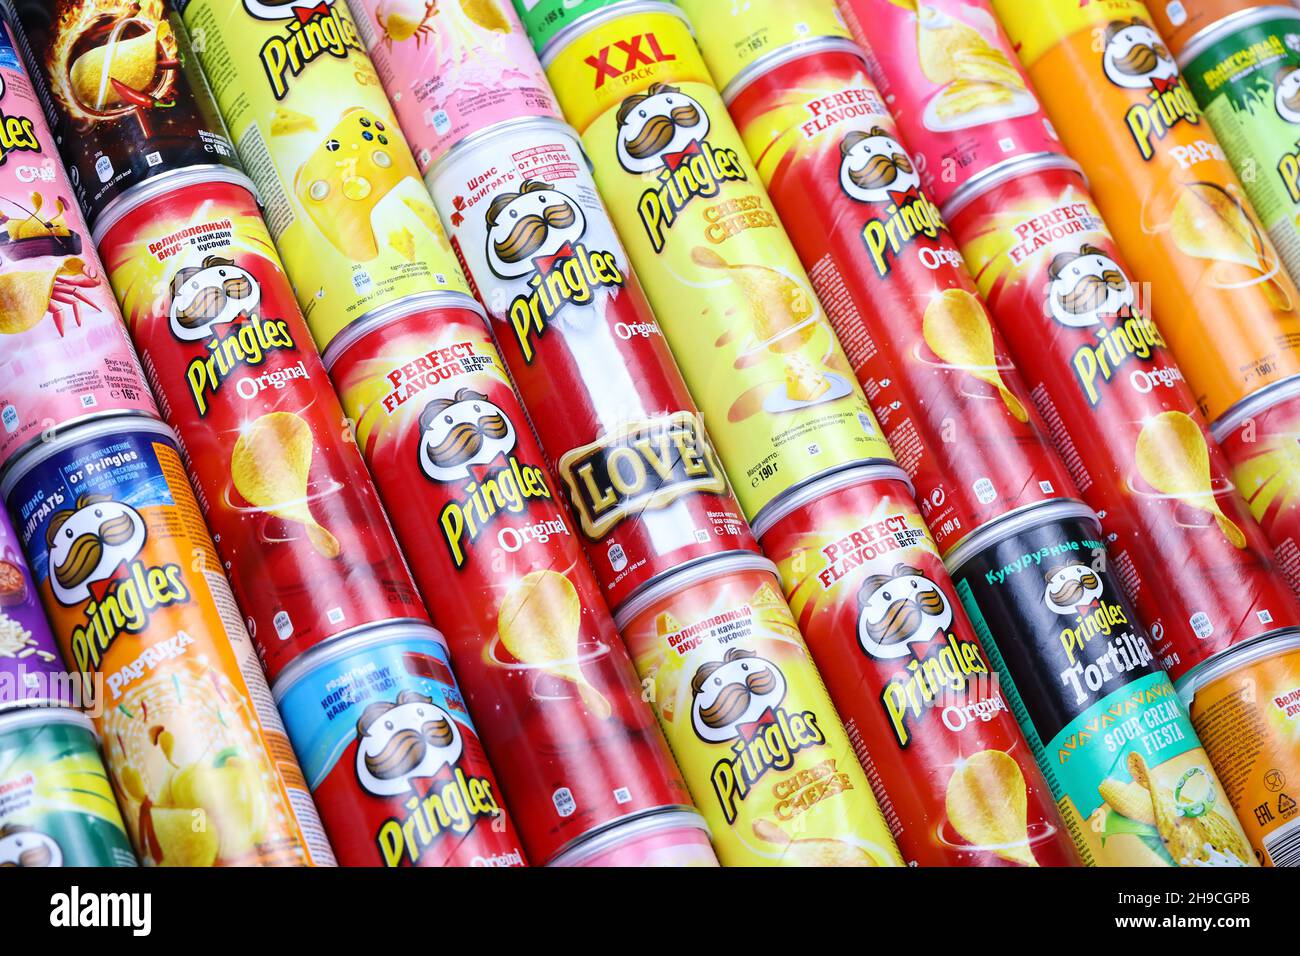 KHARKOV, UKRAINE - MARCH 30, 2021: Many Pringles cylinder chips boxes with varios colors and flavours. American brand of stackable potato-based crisps Stock Photo